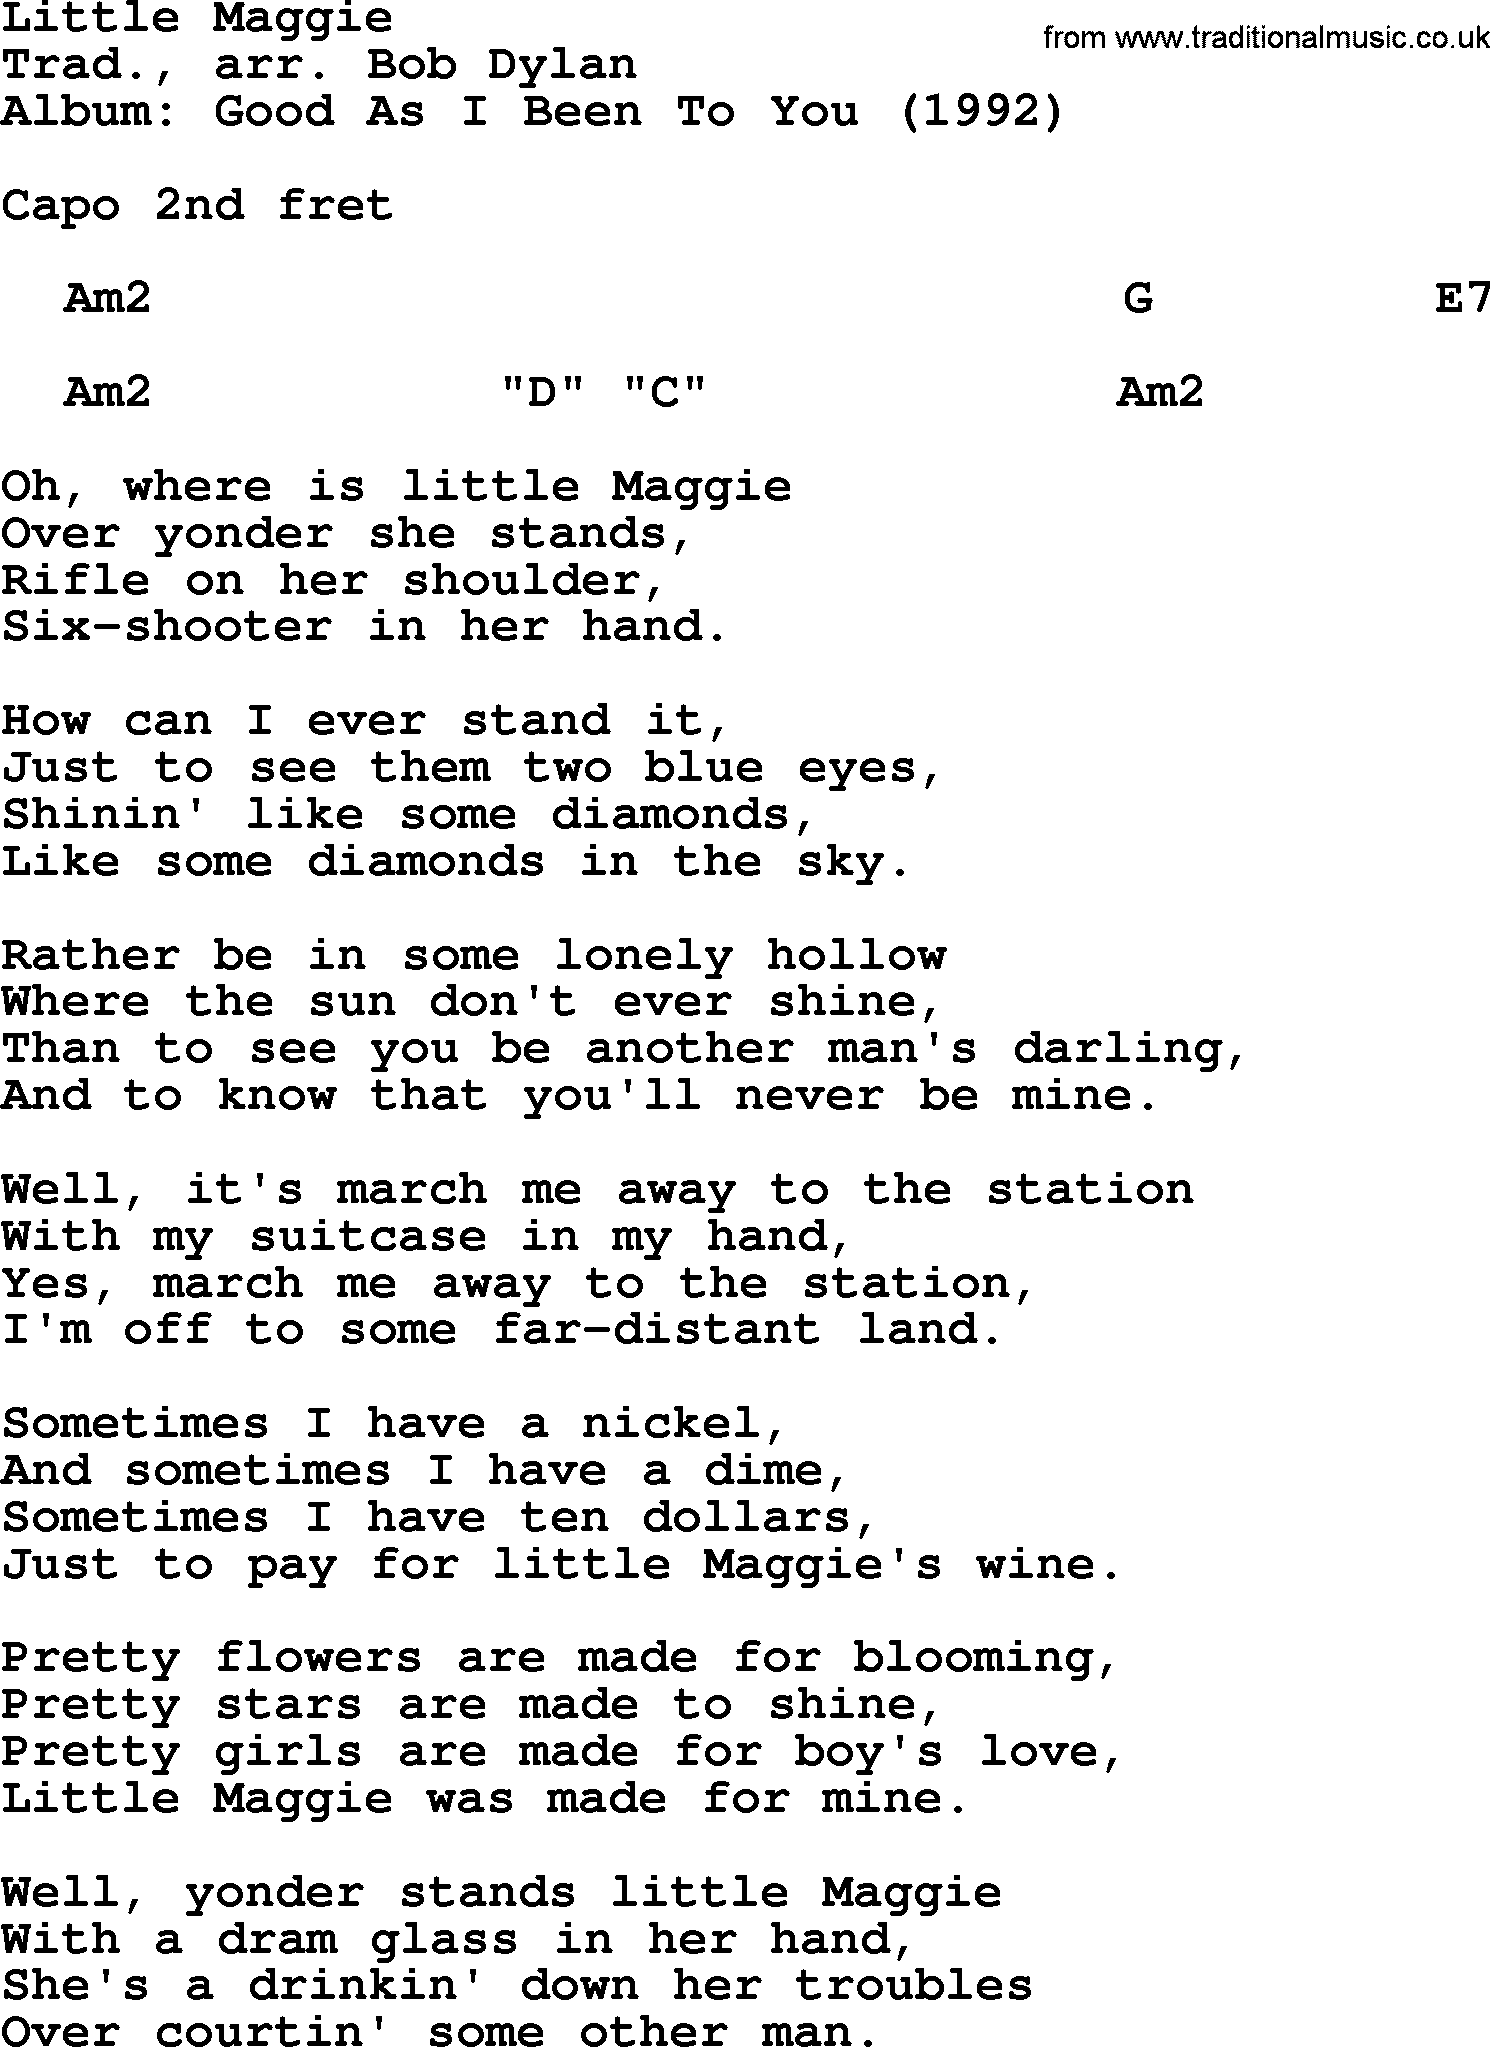 Bob Dylan song, lyrics with chords - Little Maggie